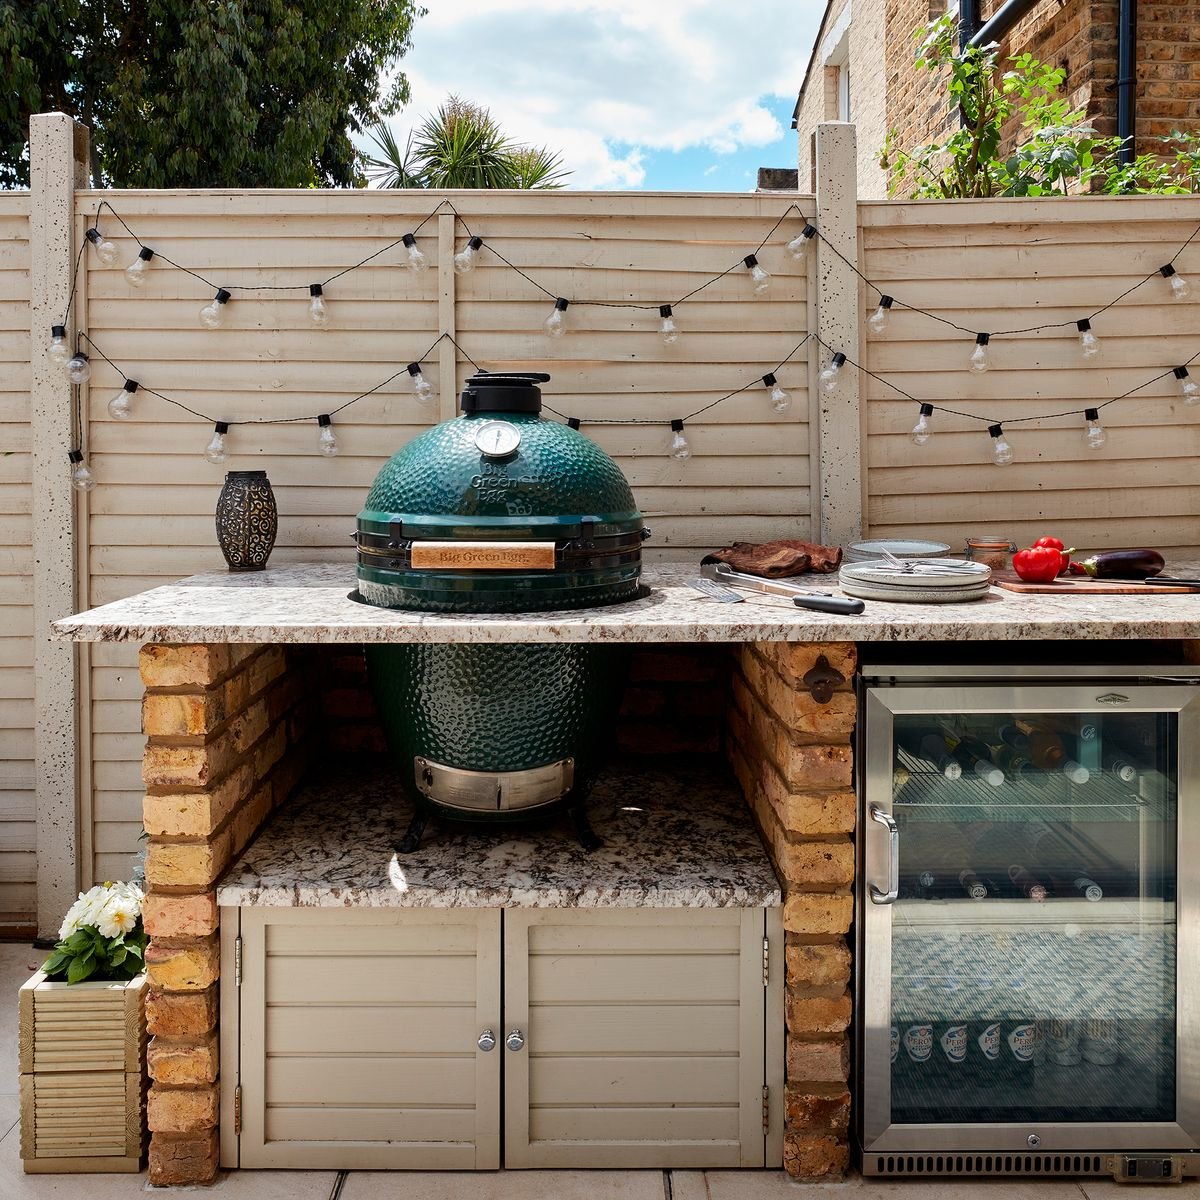 How to build an outdoor kitchen for a social and functional alfresco space